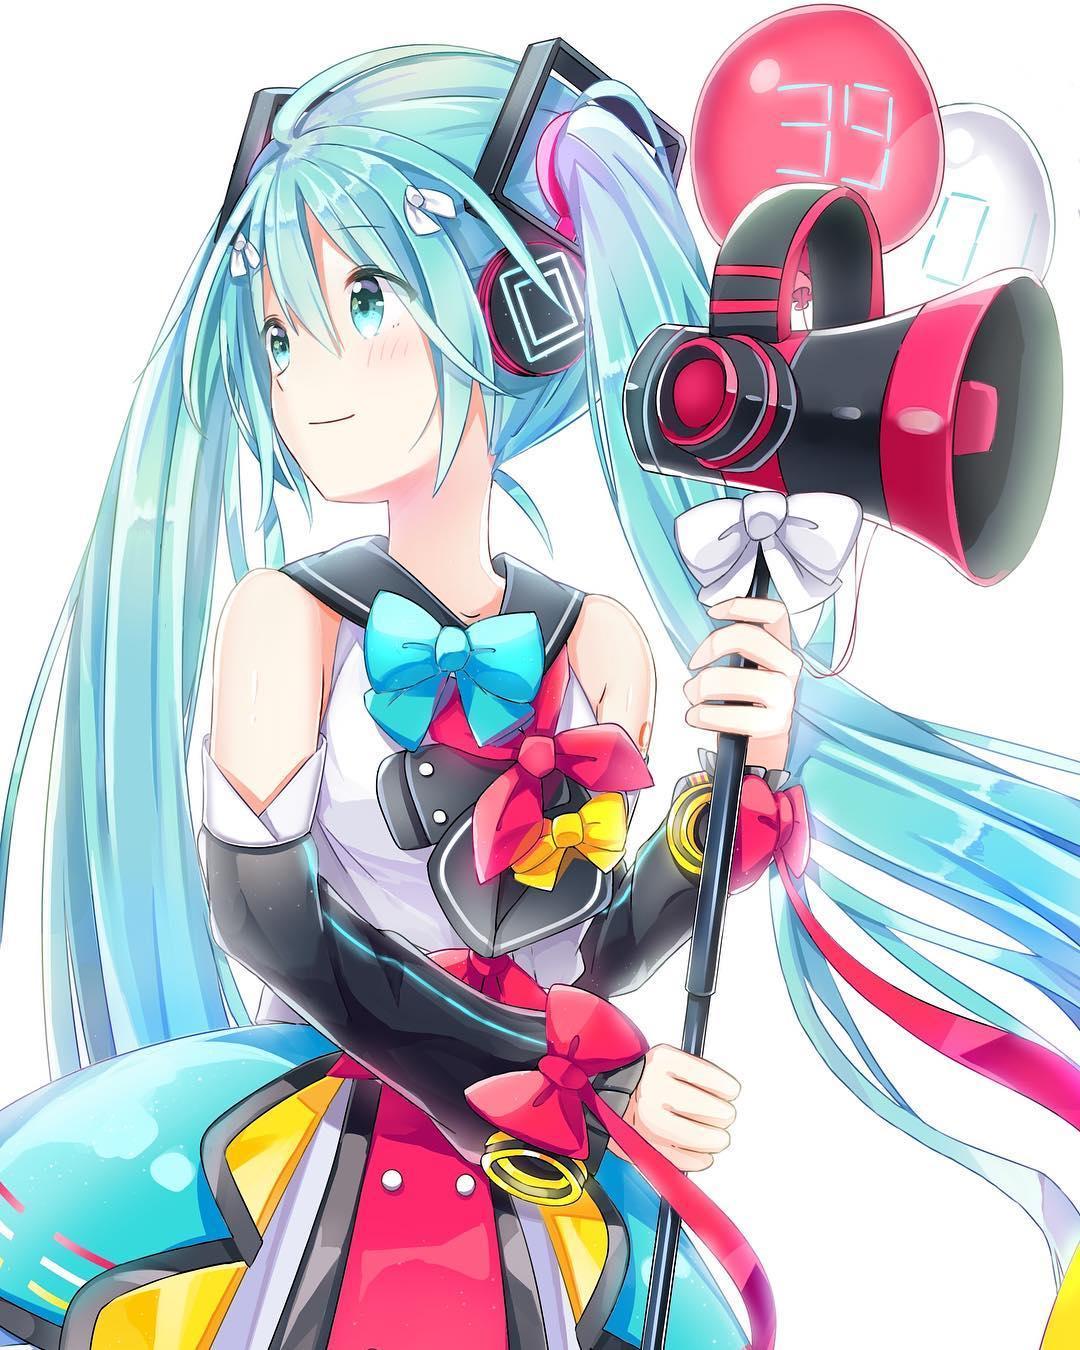 Hatsune Miku 初音ミク Live Wallpaper Hd 4k For Android Apk Download